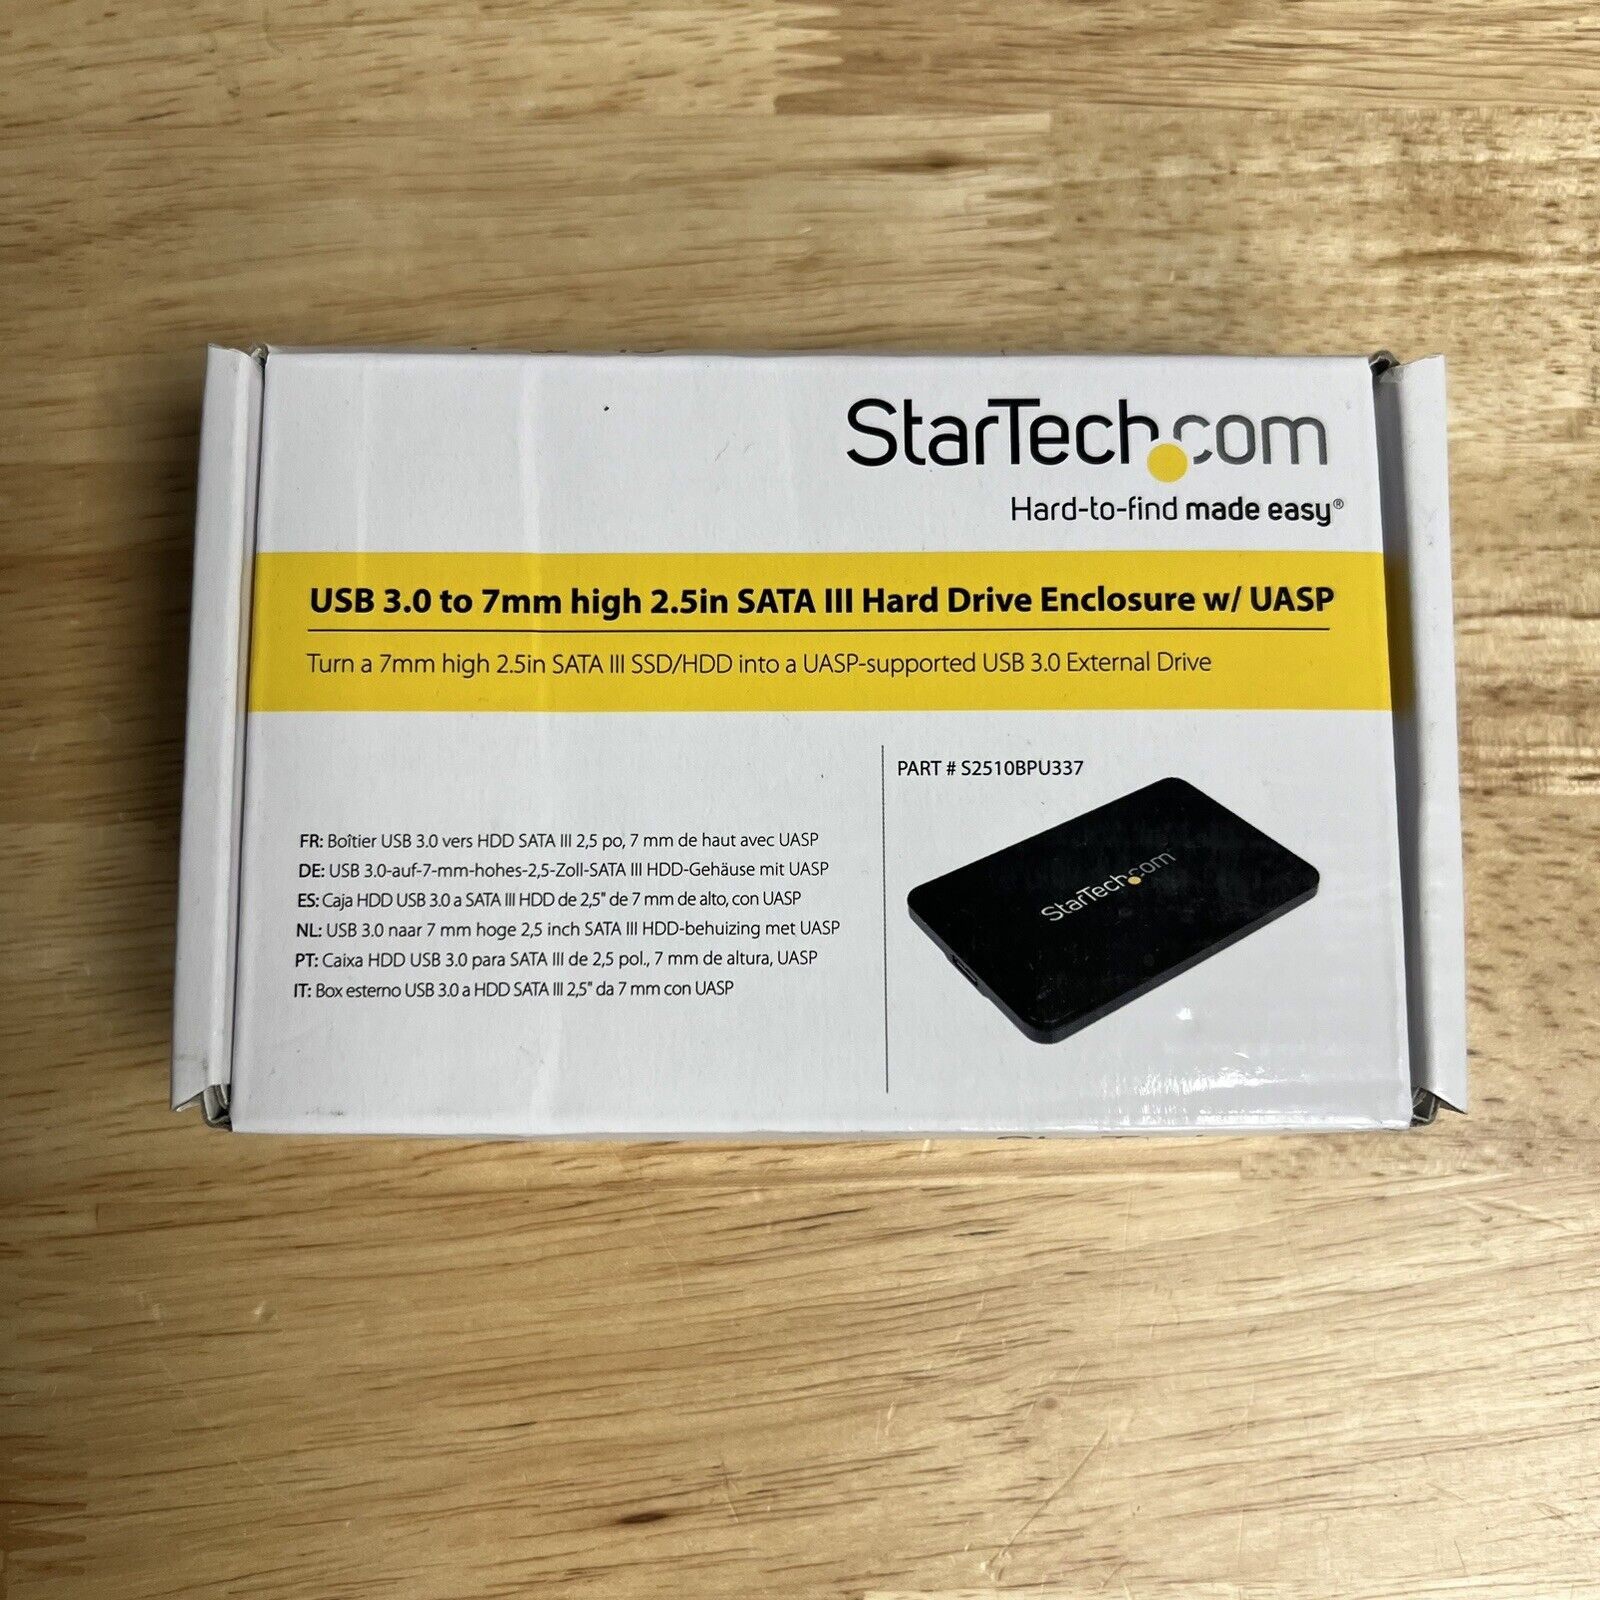 StarTech Usb 3.0 To 7mm High 2.5in SATA 3 Hard Drive Enclosure w/ UASP